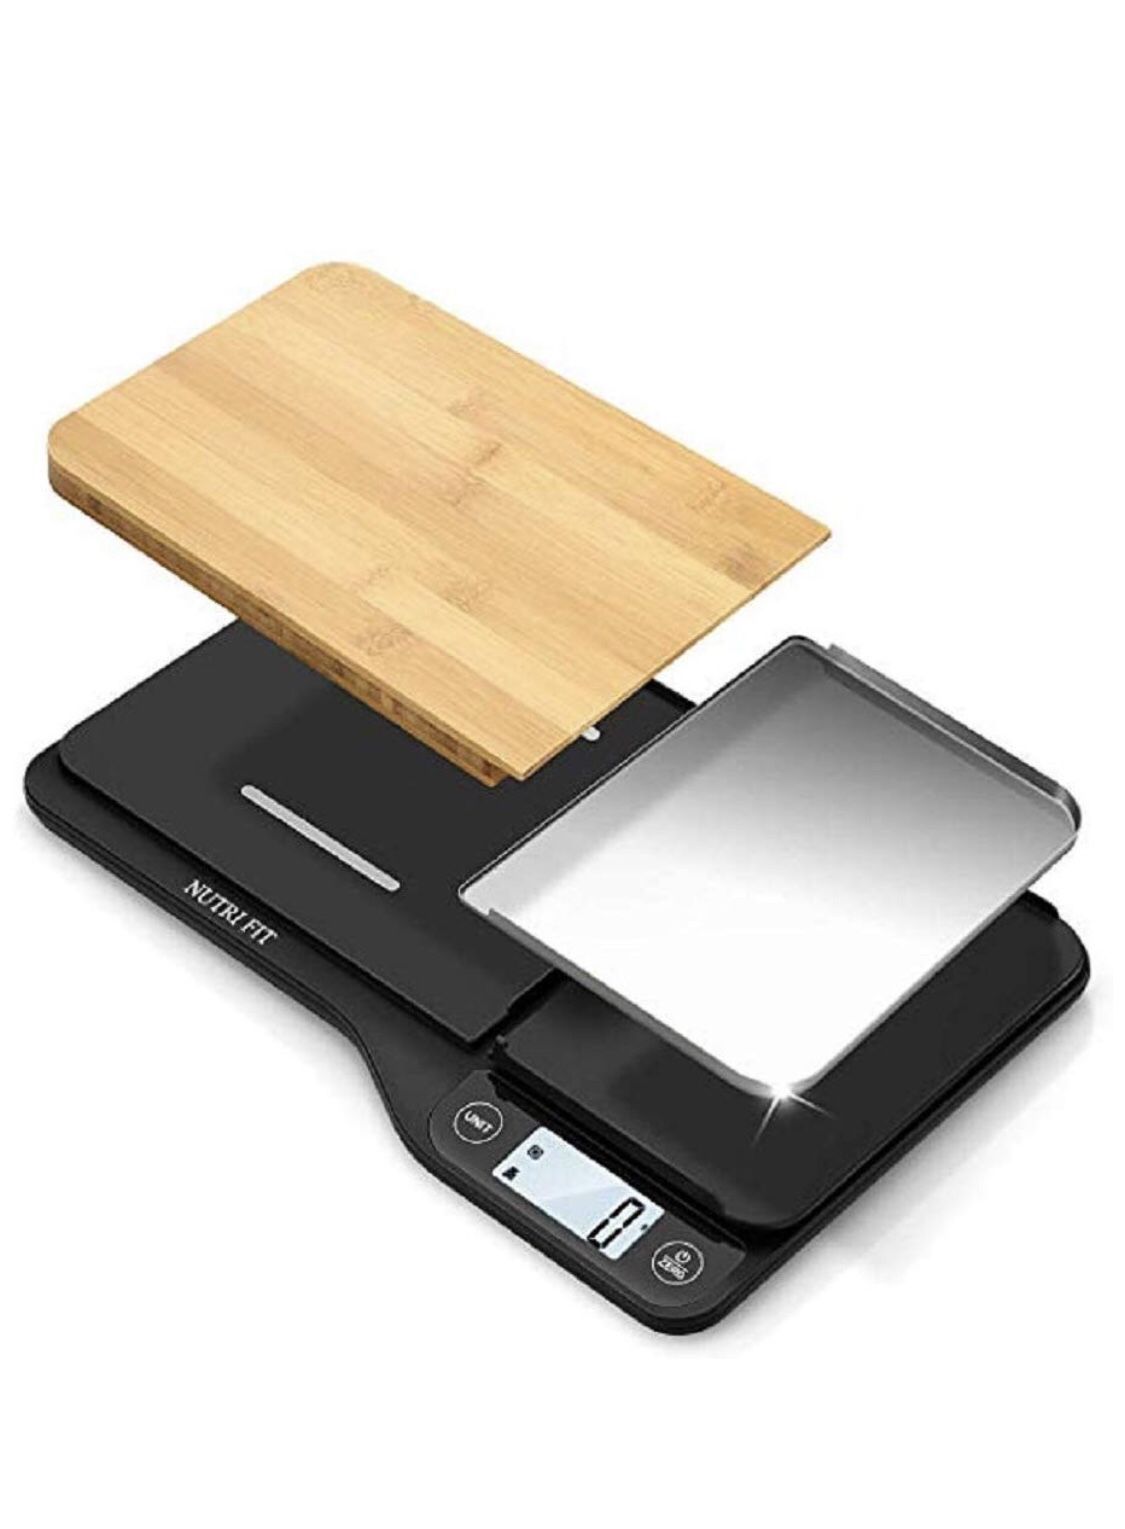 Super-Chef Food Scale with Removable Cutting Board & Tray - 3 in 1 Digital Kitchen Scale, LCD Display, 11lb 5kg, Easy for Cooking & Clean